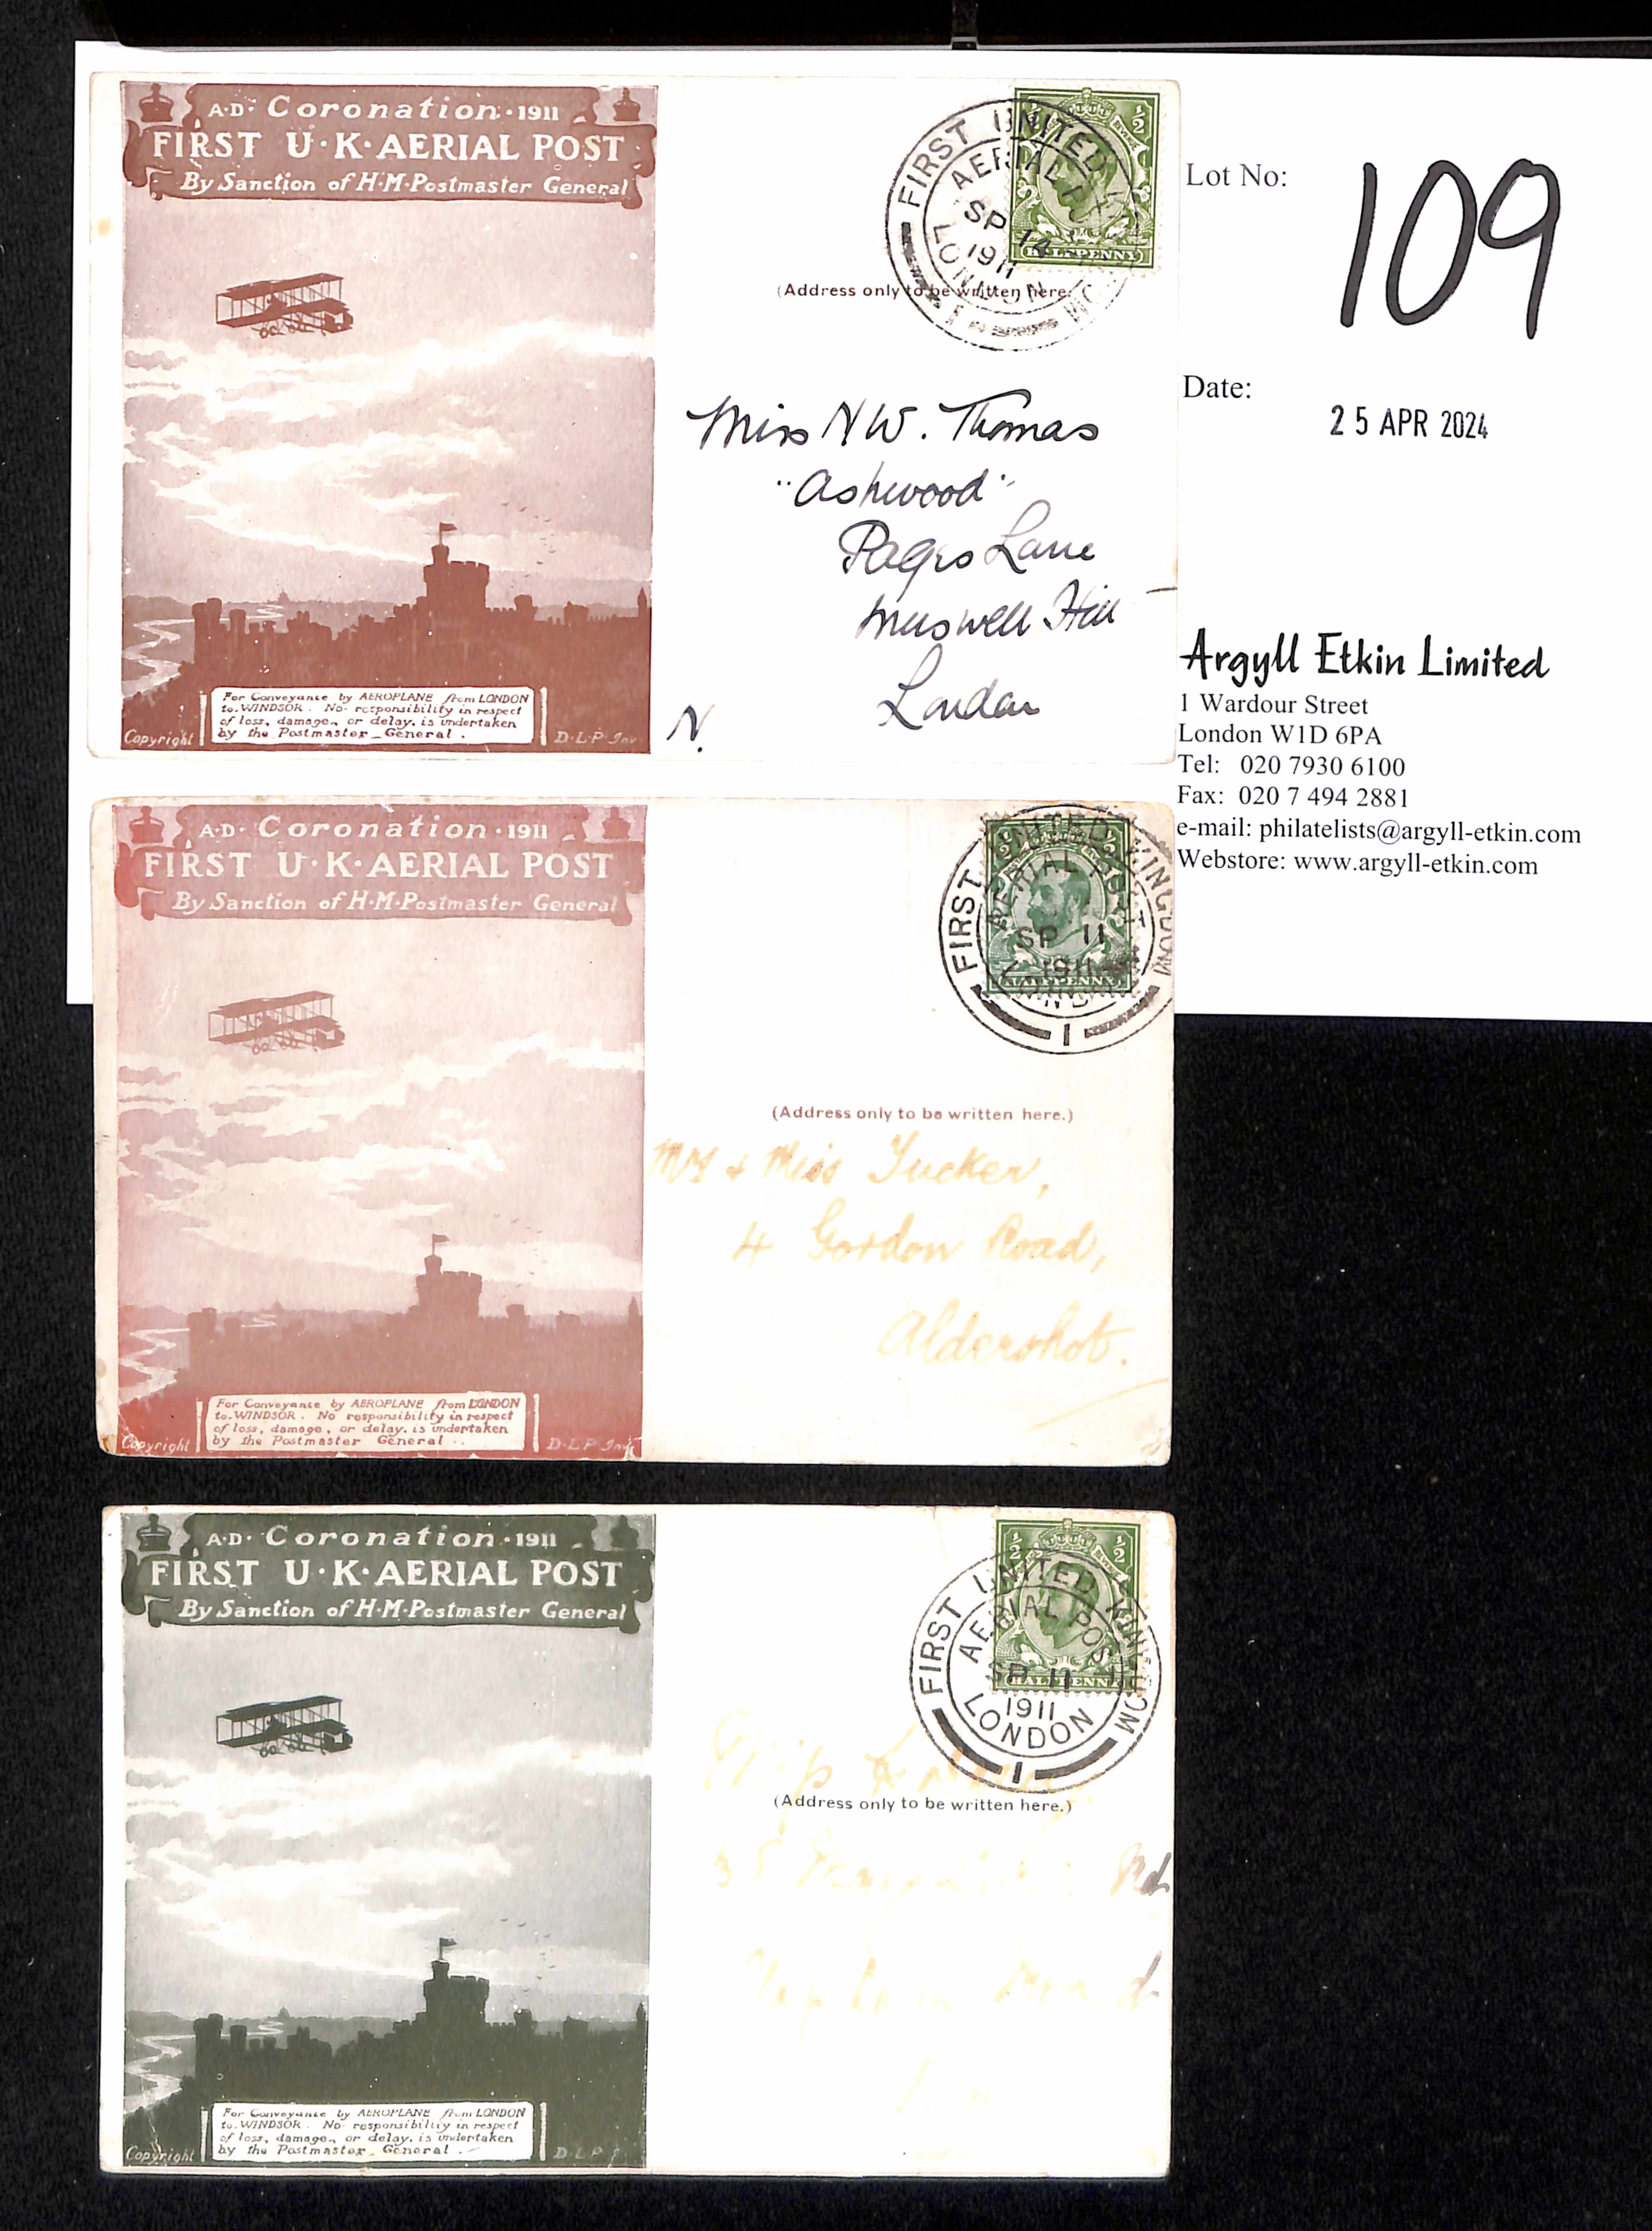 First U.K Aerial Post. 1911 (Sep 11-14) Brown, red brown and green London to Windsor postcards